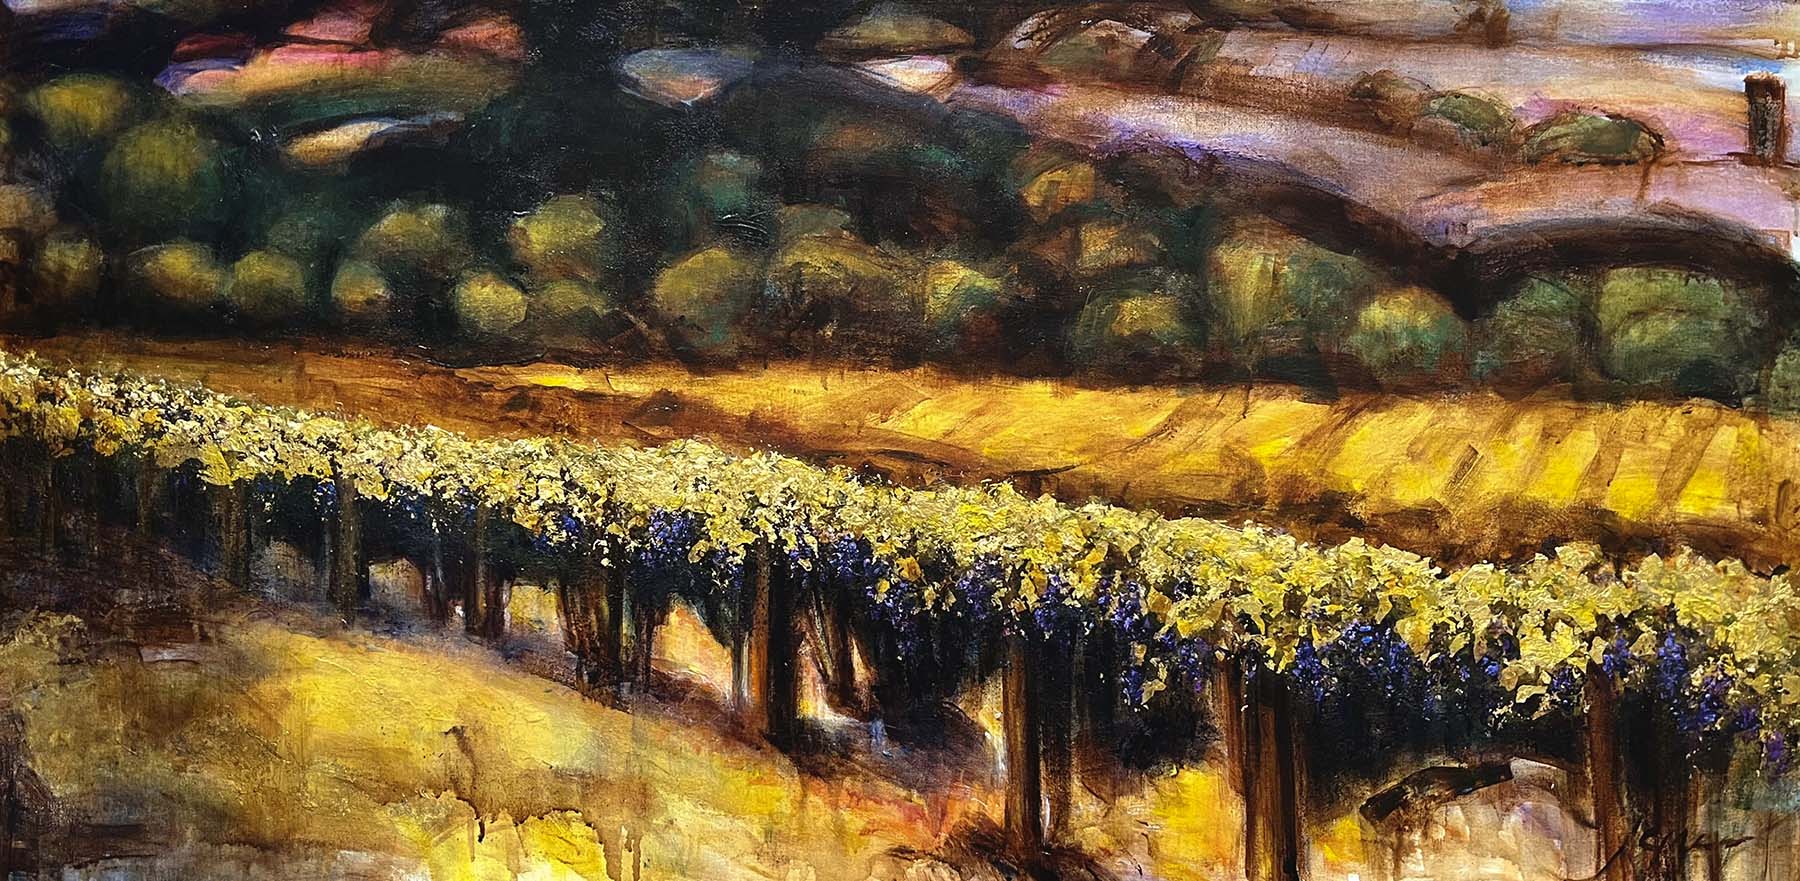 Contemporary art. Title: Sunset Vineyard, Acrylic & Gold Leafing, 24 x 48 in by Canadian Artist Janice McLean.